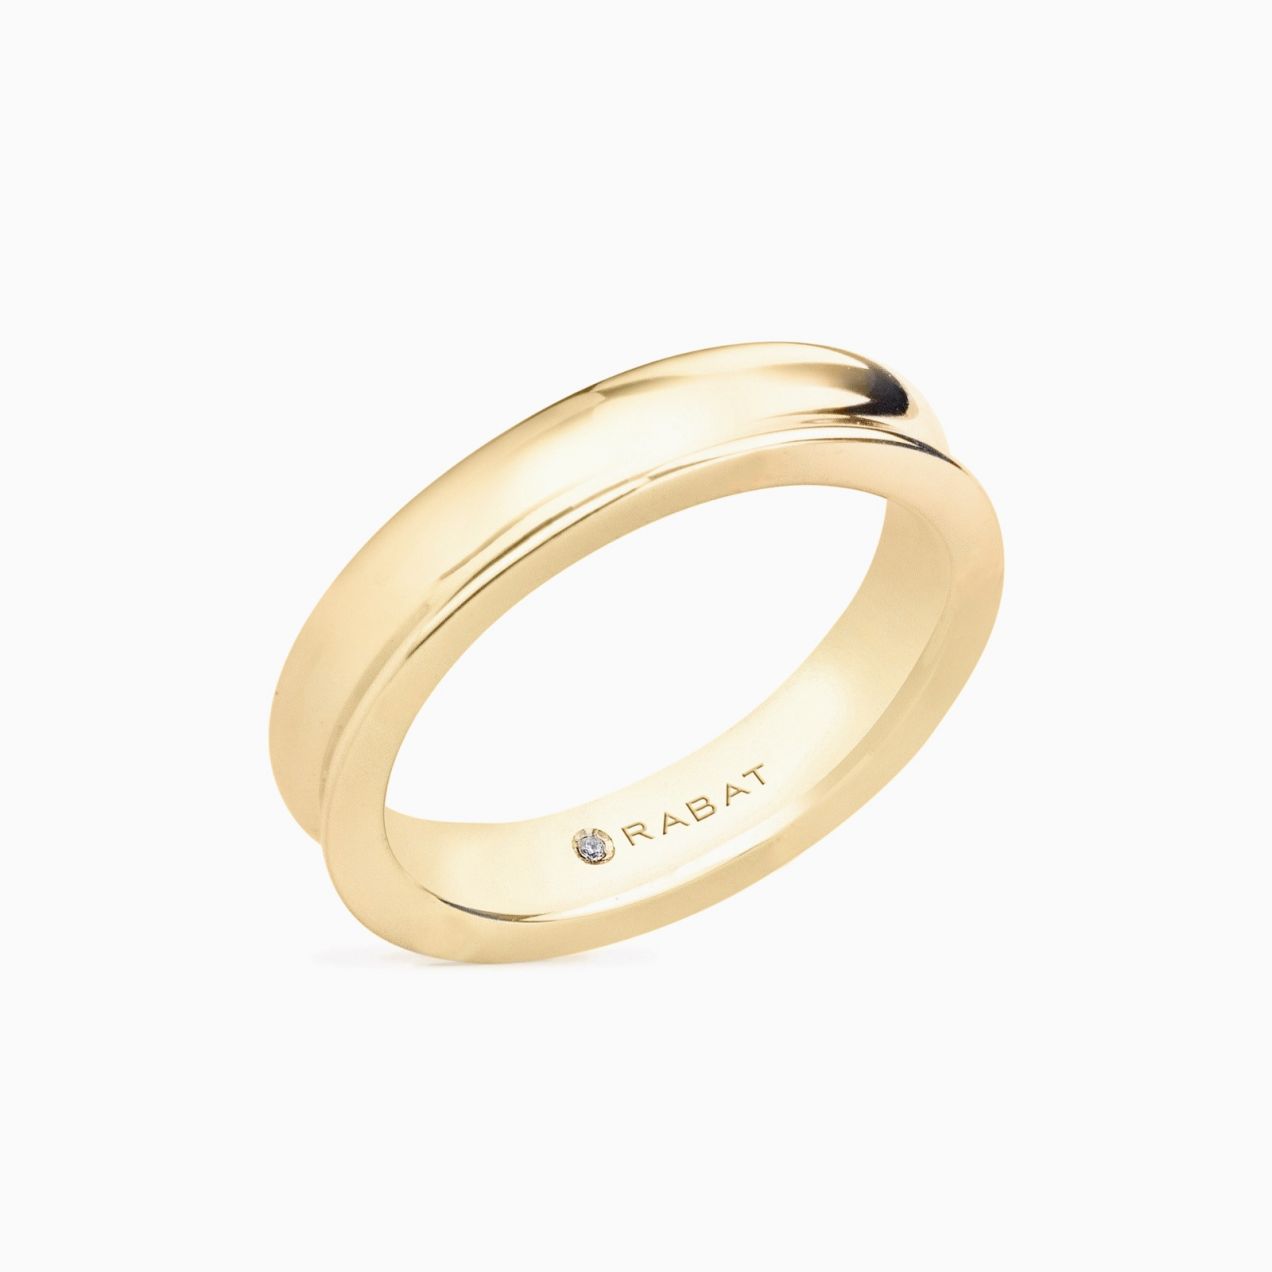 London wedding band in gold